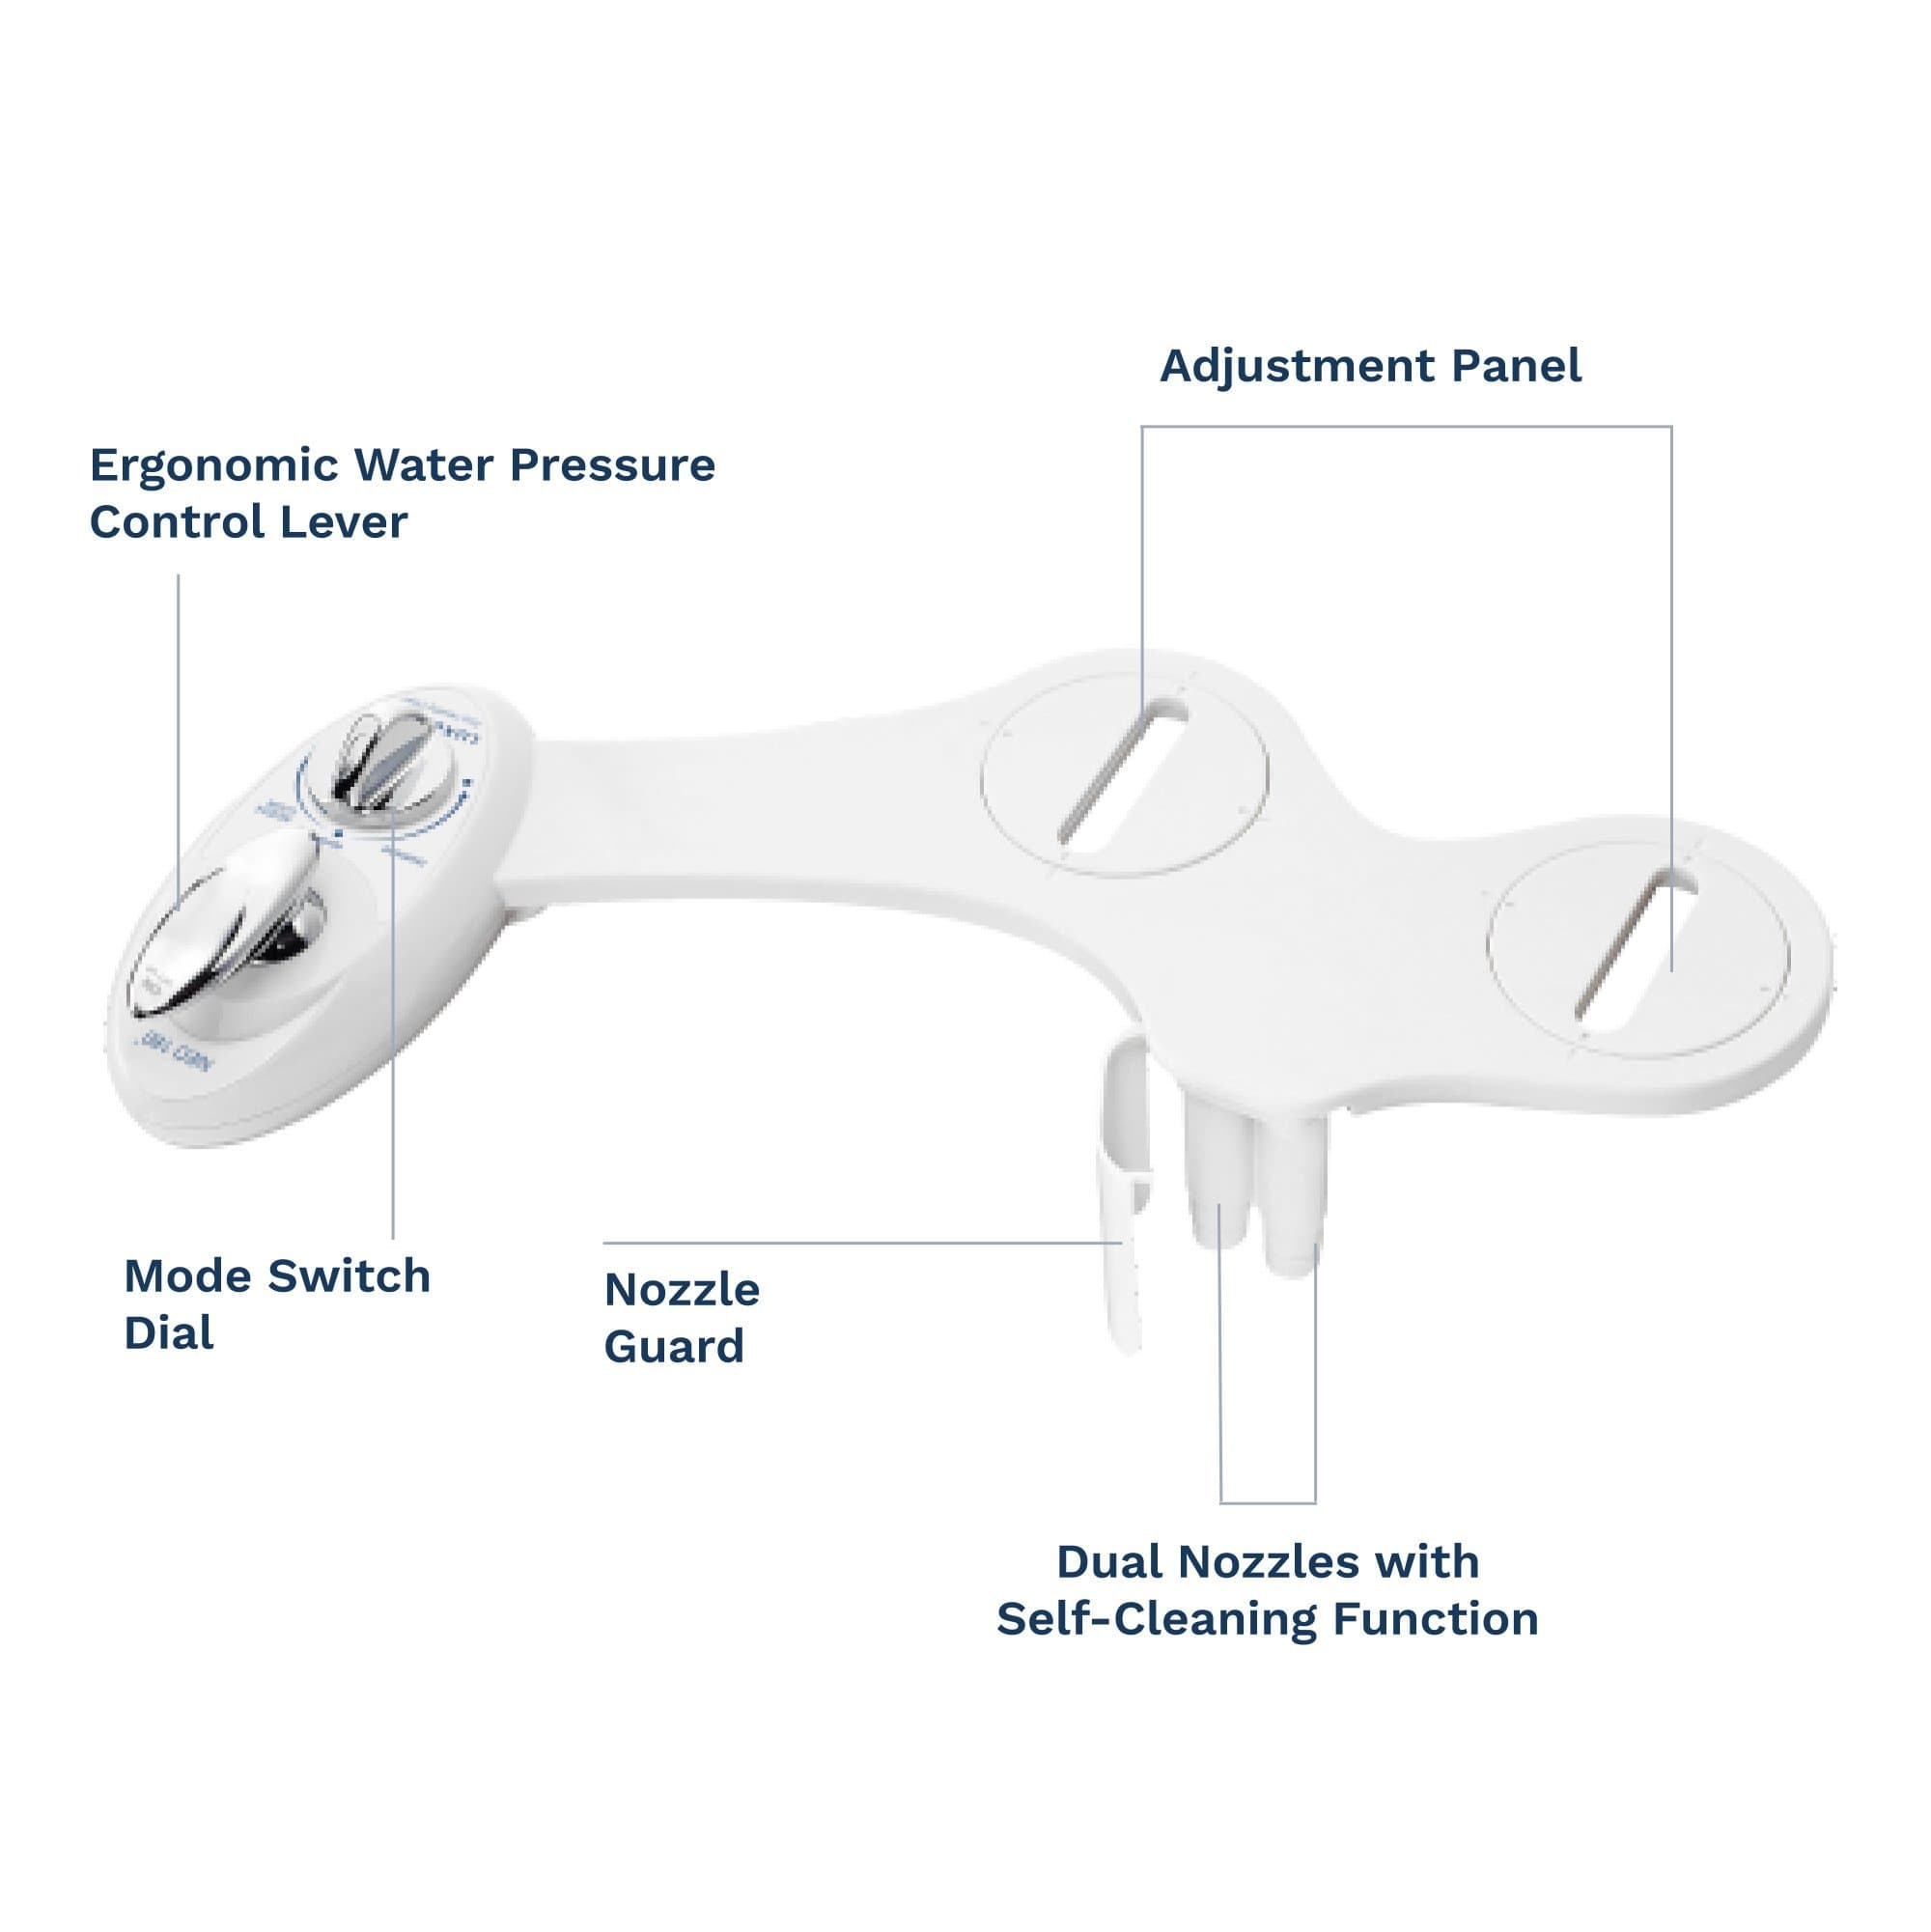 NEO 180 Parts: Water Pressure Control Lever, Mode Switch Dial, Adjustment Panels, Nozzle Guard, Dual Nozzles+Self Clean